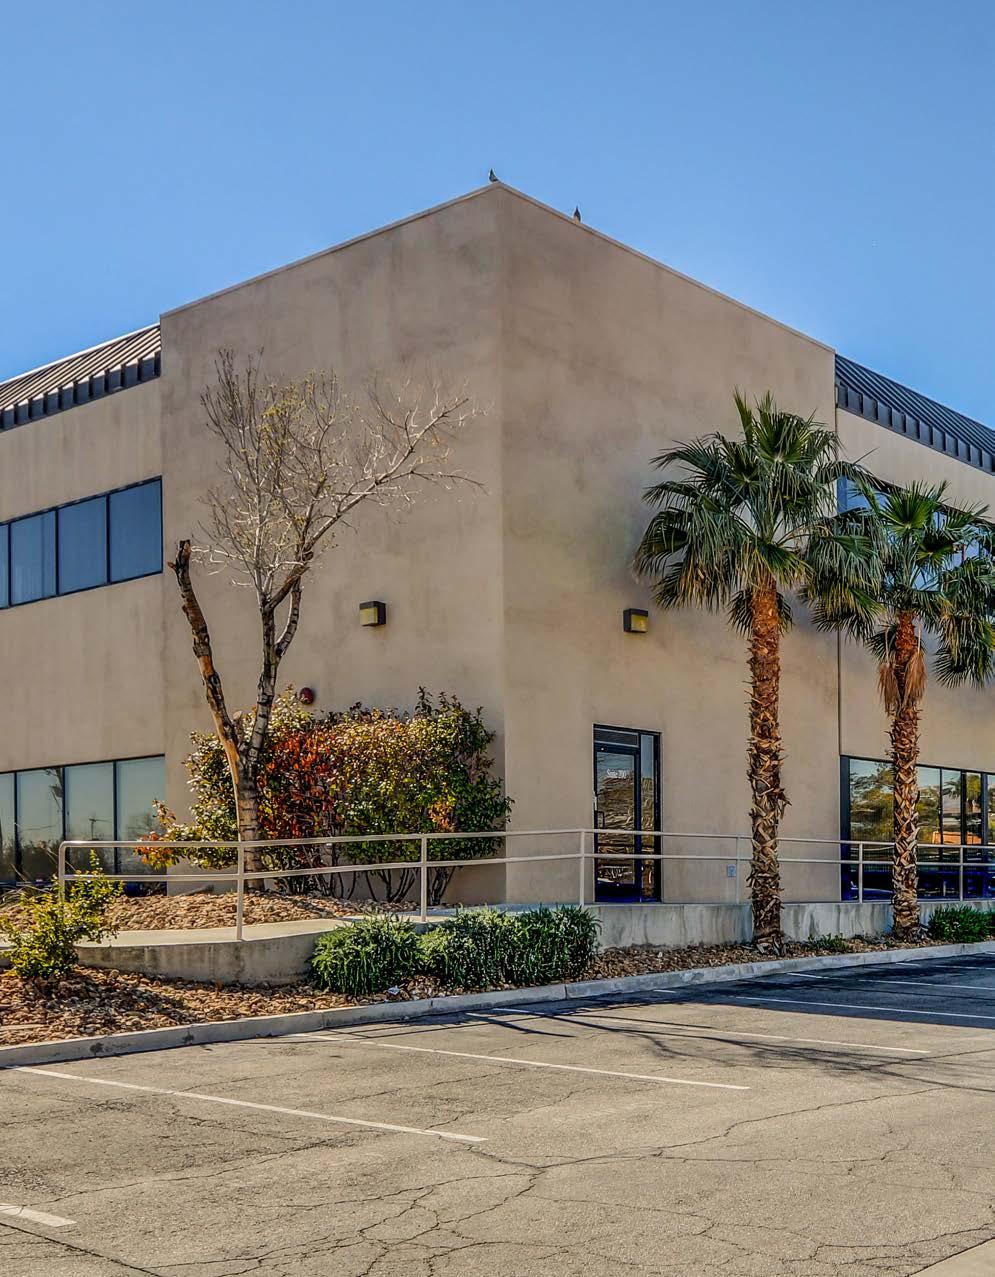 Property Highlights Ideal for an Owner/User or Value Add Investor Qualifies for SBA Financing Additional Rental Income In Place Located in the Prosperous West Las Vegas Submarket Turn Key